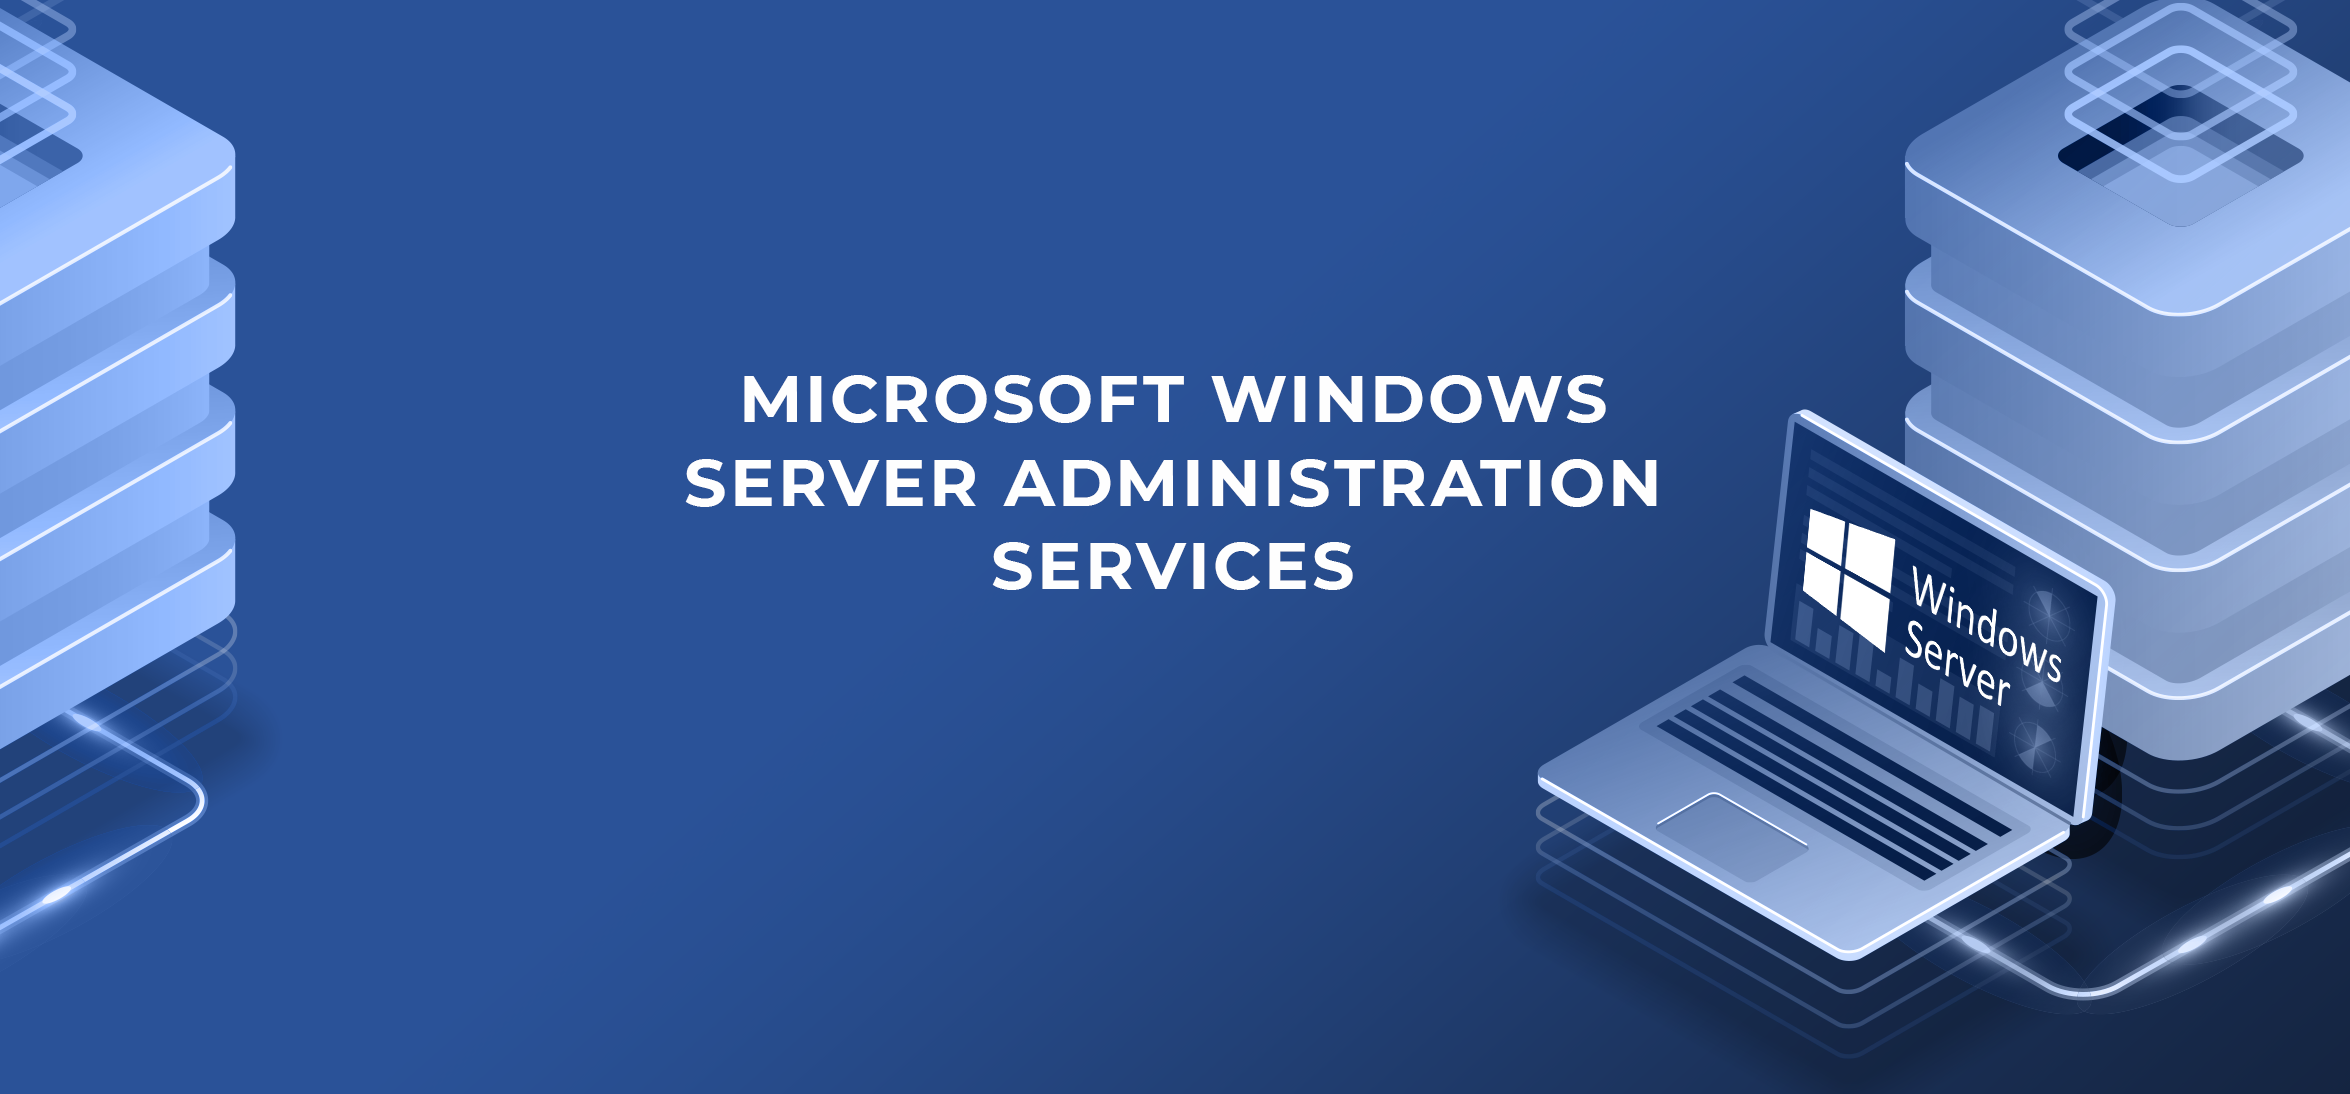 Effective Windows Server Administration and Support Solution Provider in Borrego Springs CA, 92004